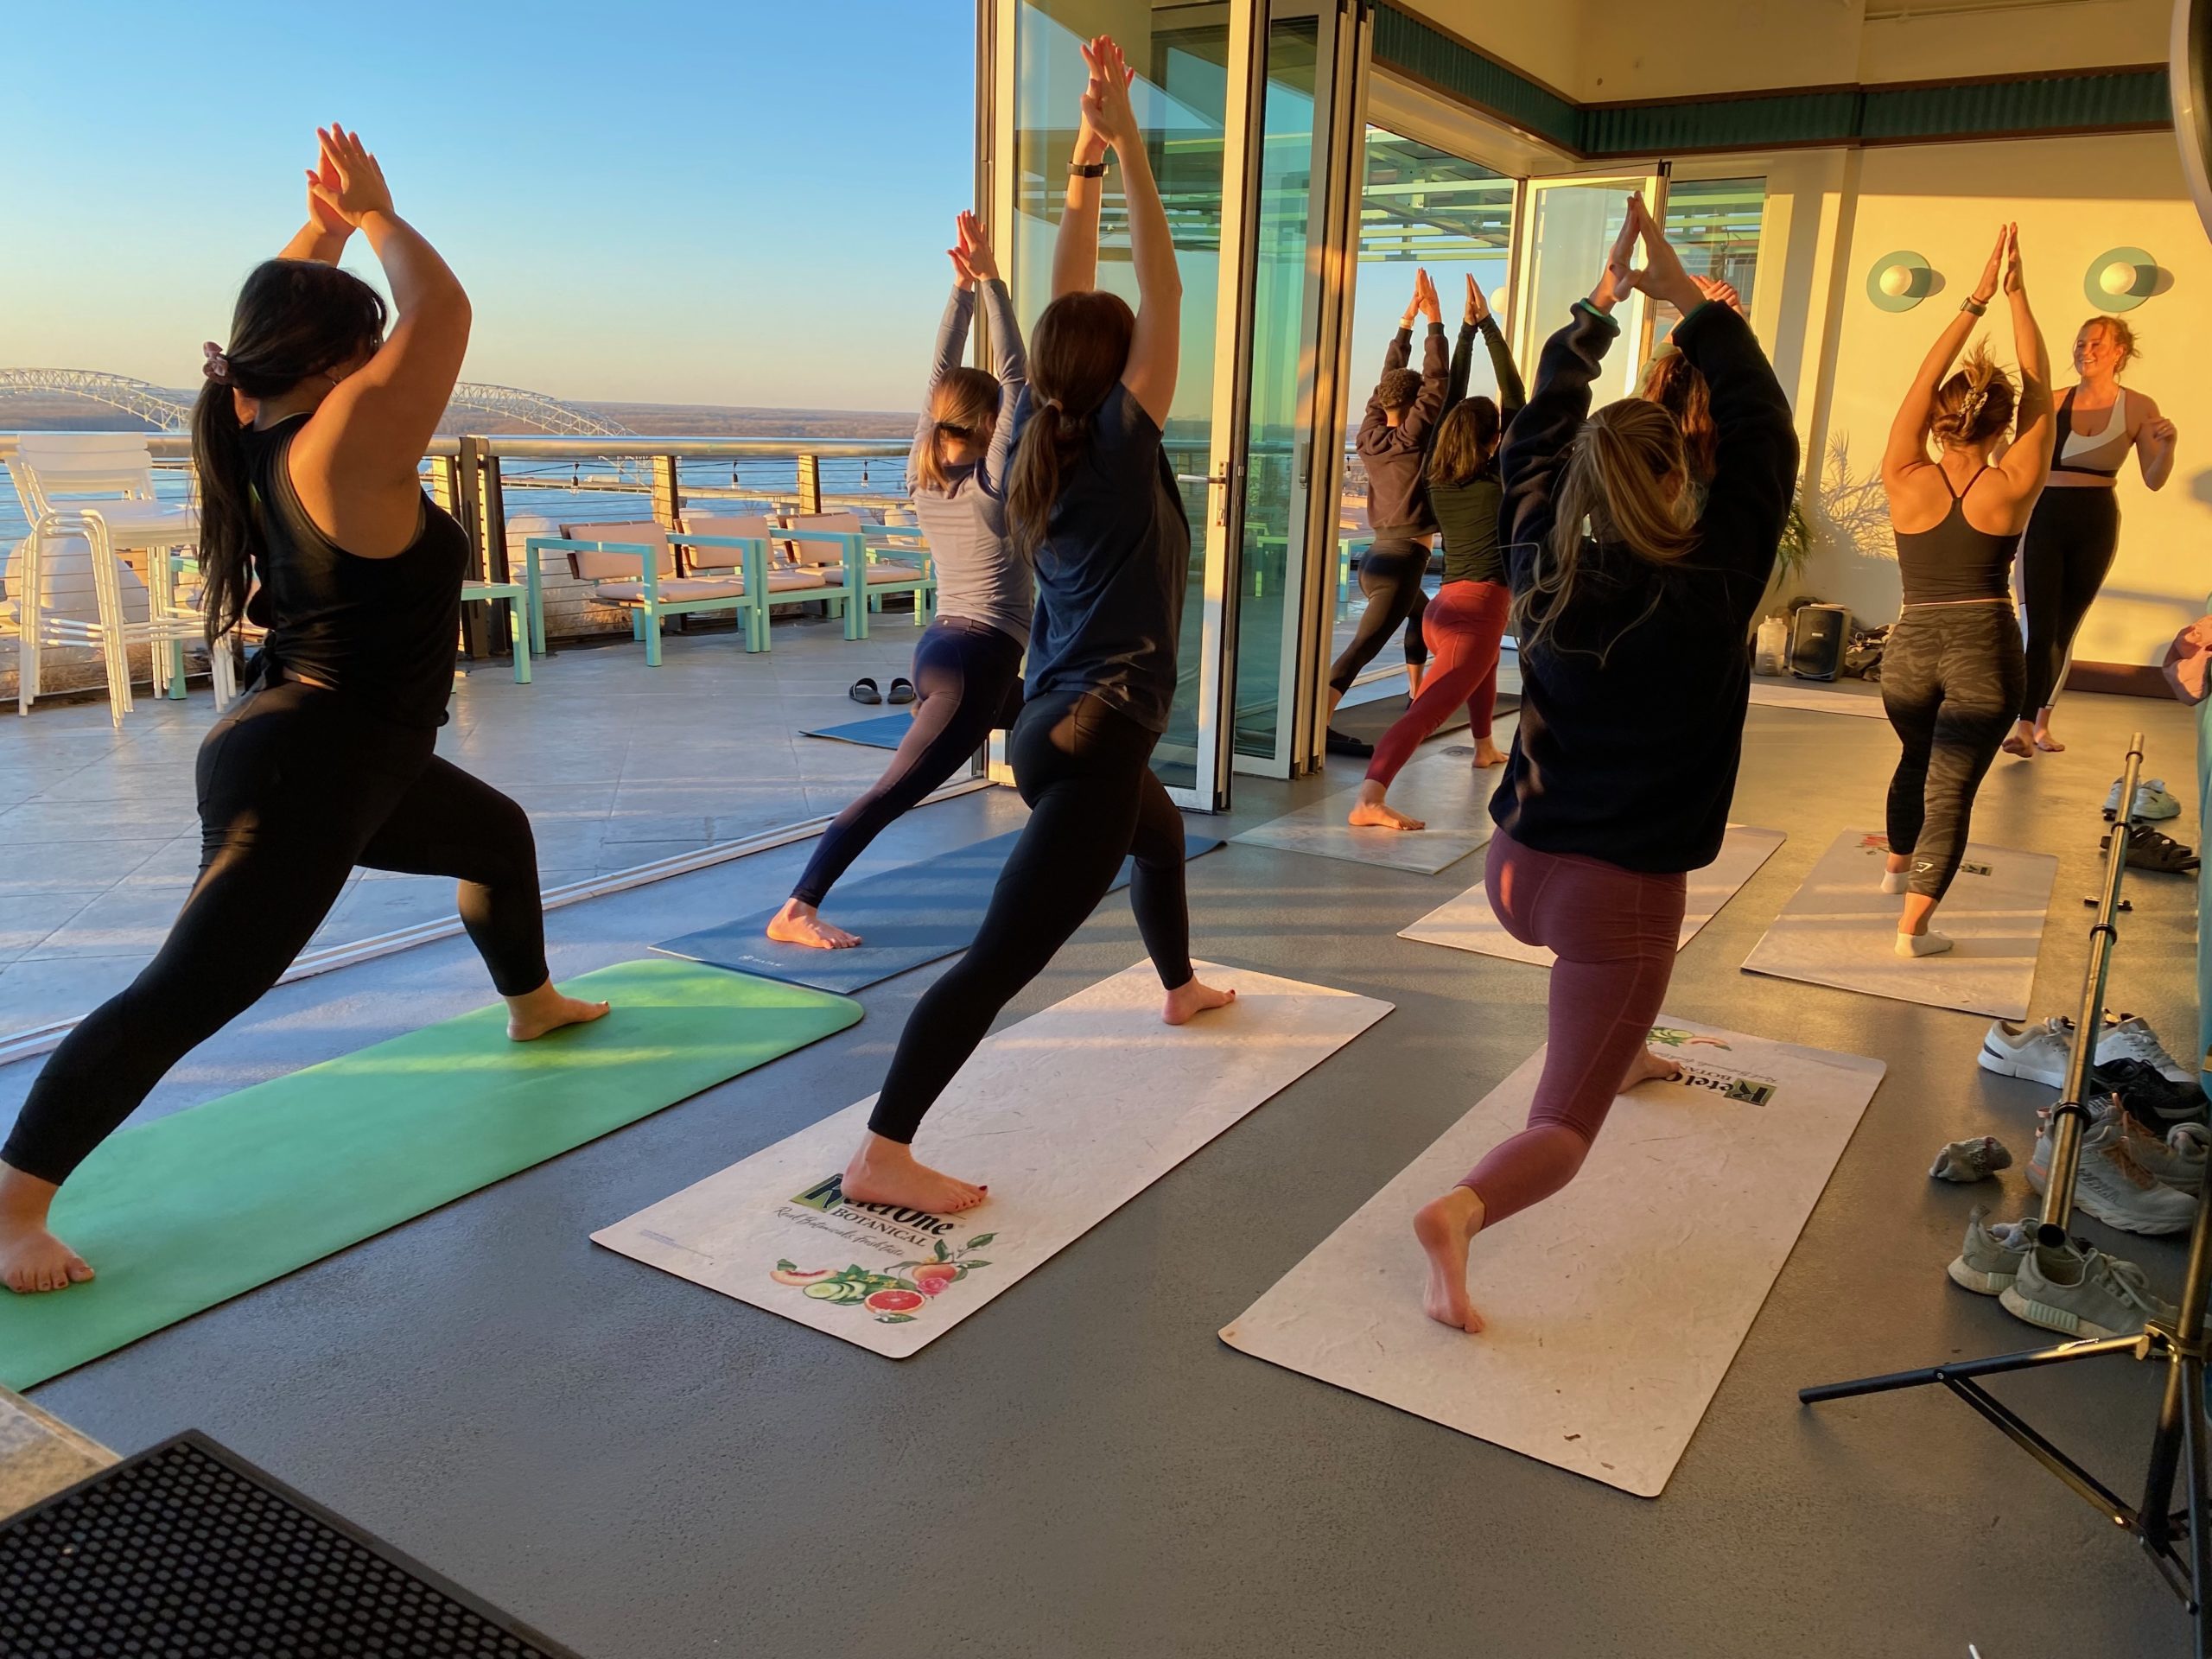 I Love Melville on X: @TheWhippetZA #Melville's first rooftop yoga and  green smoothie session has started🙂. What a view! #yoga #MyMelville   / X